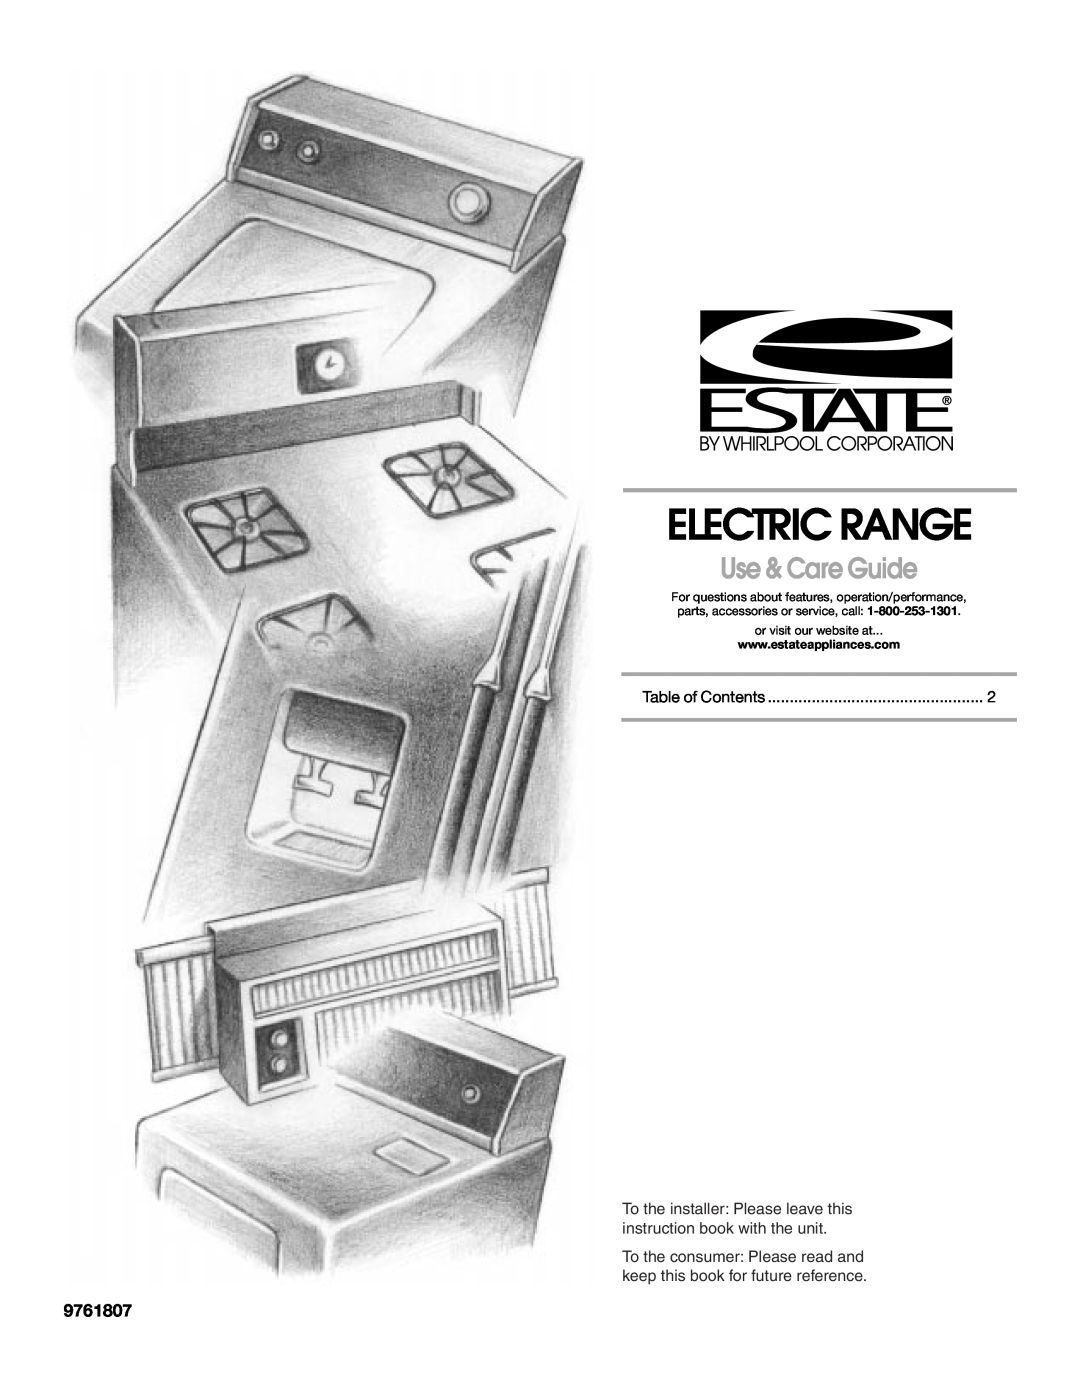 Whirlpool TES326RD0 manual 9761807, Electric Range, Use & Care Guide, or visit our website at 